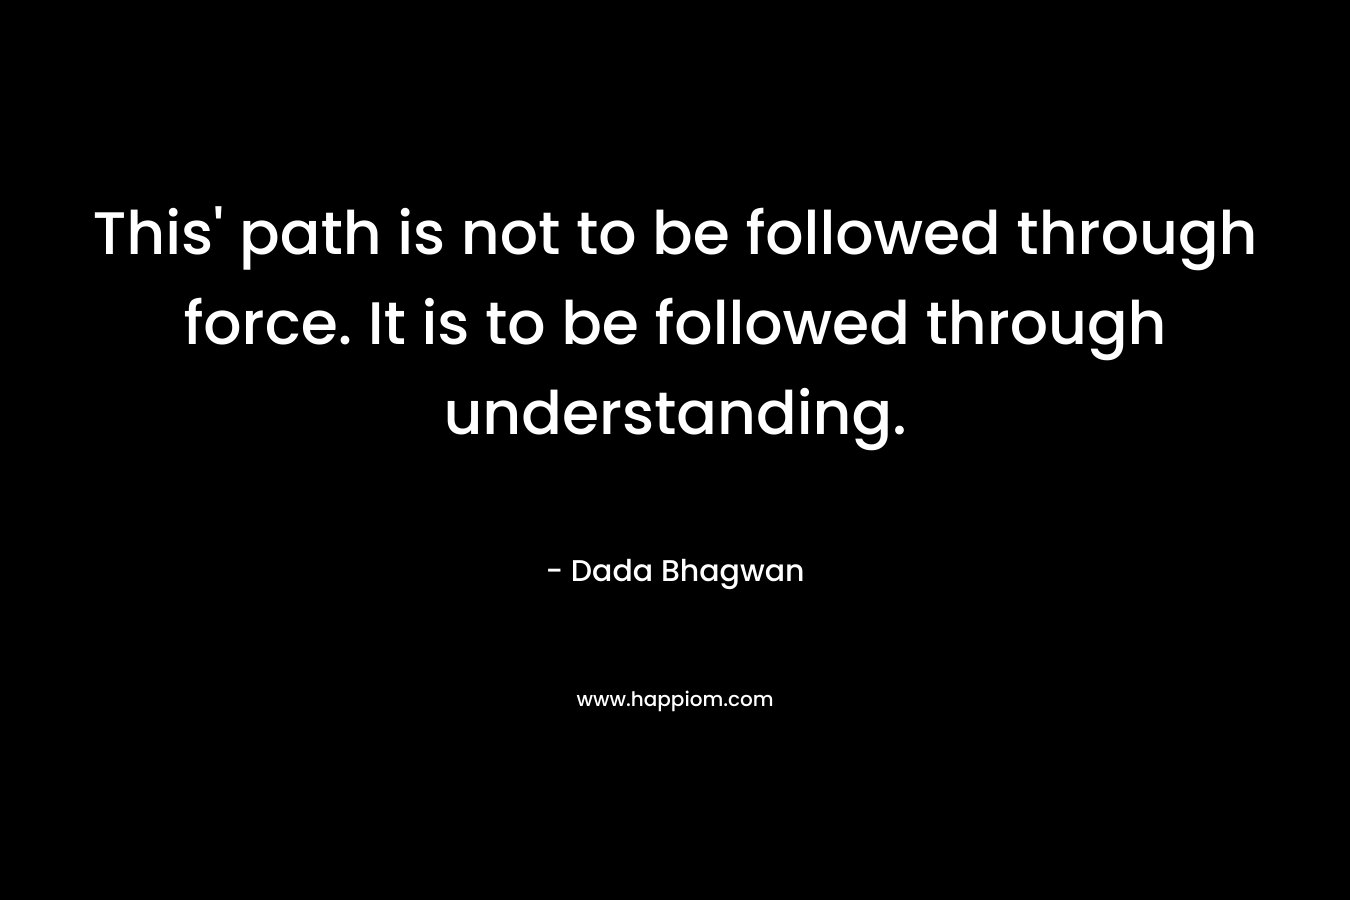 This' path is not to be followed through force. It is to be followed through understanding.